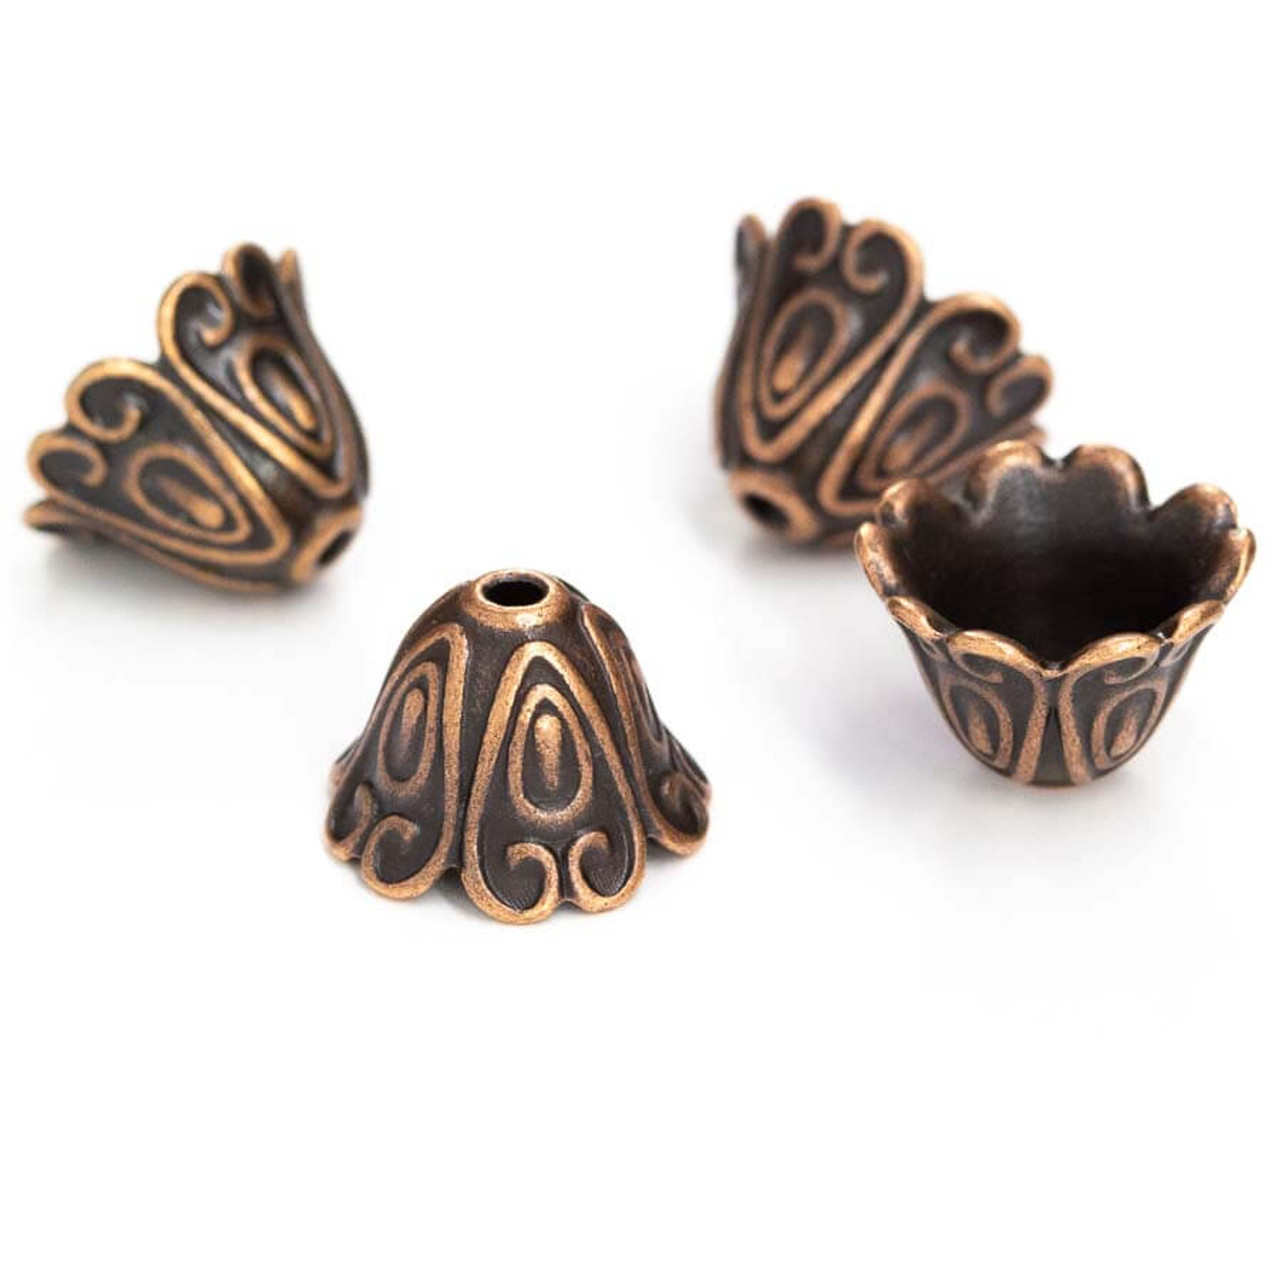 Antiqued Copper Plated TIBETAN STYLE FILIGREE BEAD CAPS MIX